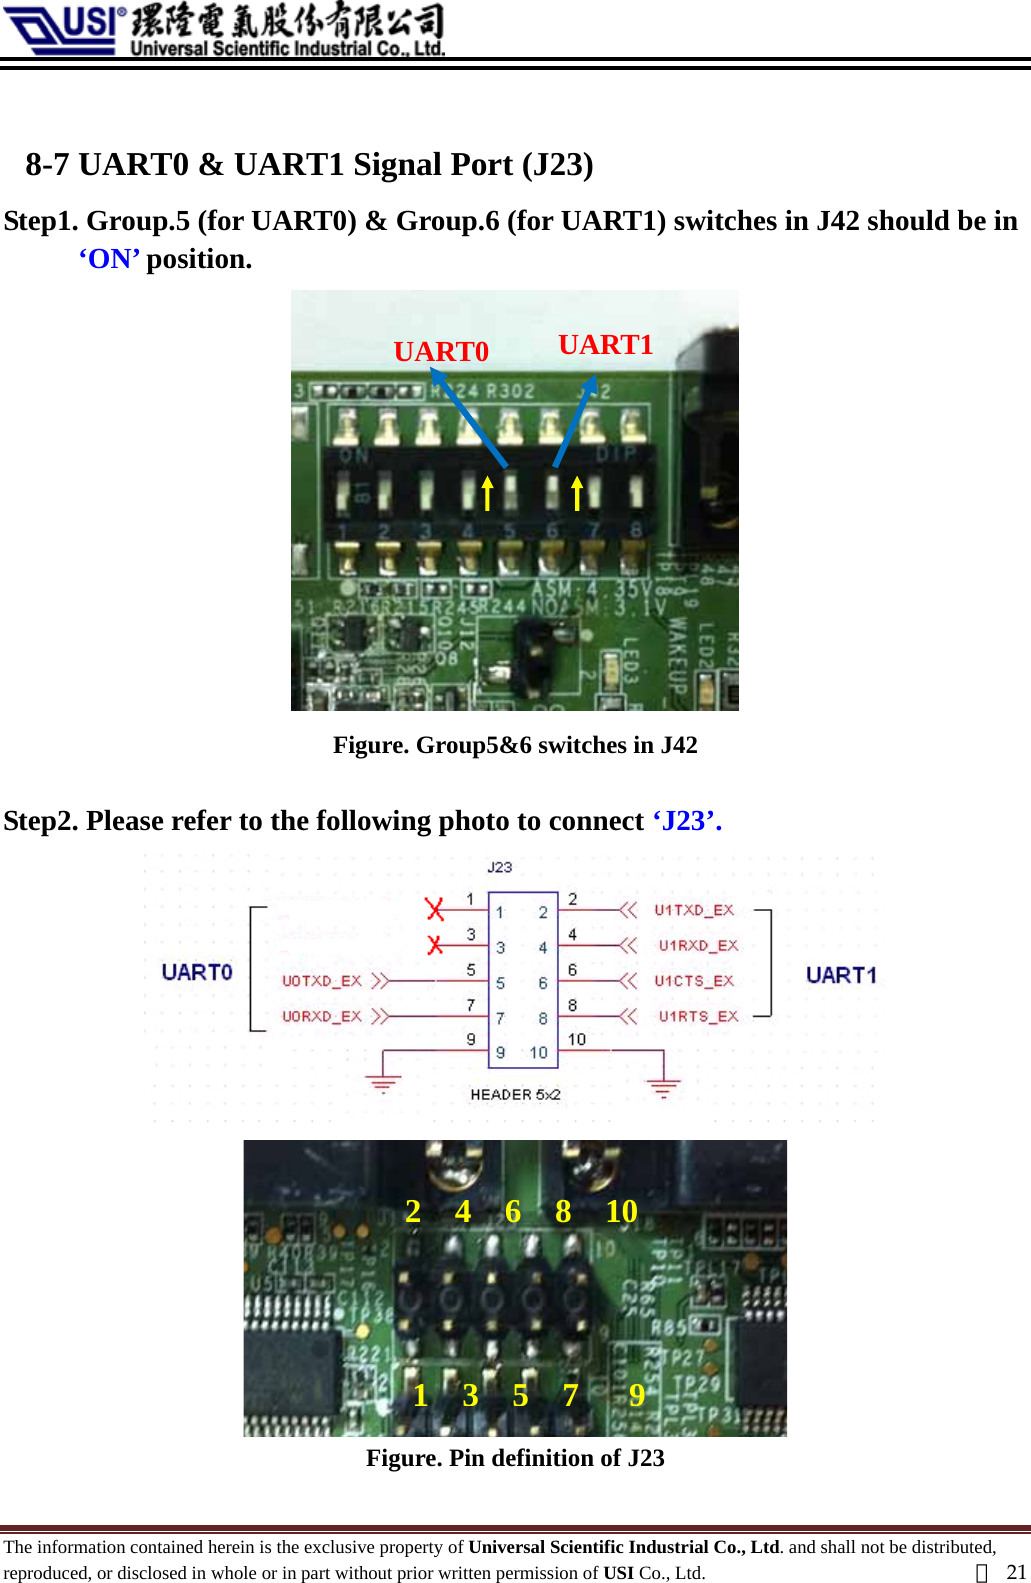   8-7 UART0 &amp; UART1 Signal Port (J23) Step1. Group.5 (for UART0) &amp; Group.6 (for UART1) switches in J42 should be in ‘ON’ position. UART0  UART1  Figure. Group5&amp;6 switches in J42  Step2. Please refer to the following photo to connect ‘J23’.  2  4  6  8  101357 9Figure. Pin definition of J23 The information contained herein is the exclusive property of Universal Scientific Industrial Co., Ltd. and shall not be distributed, reproduced, or disclosed in whole or in part without prior written permission of USI Co., Ltd.  頁21 